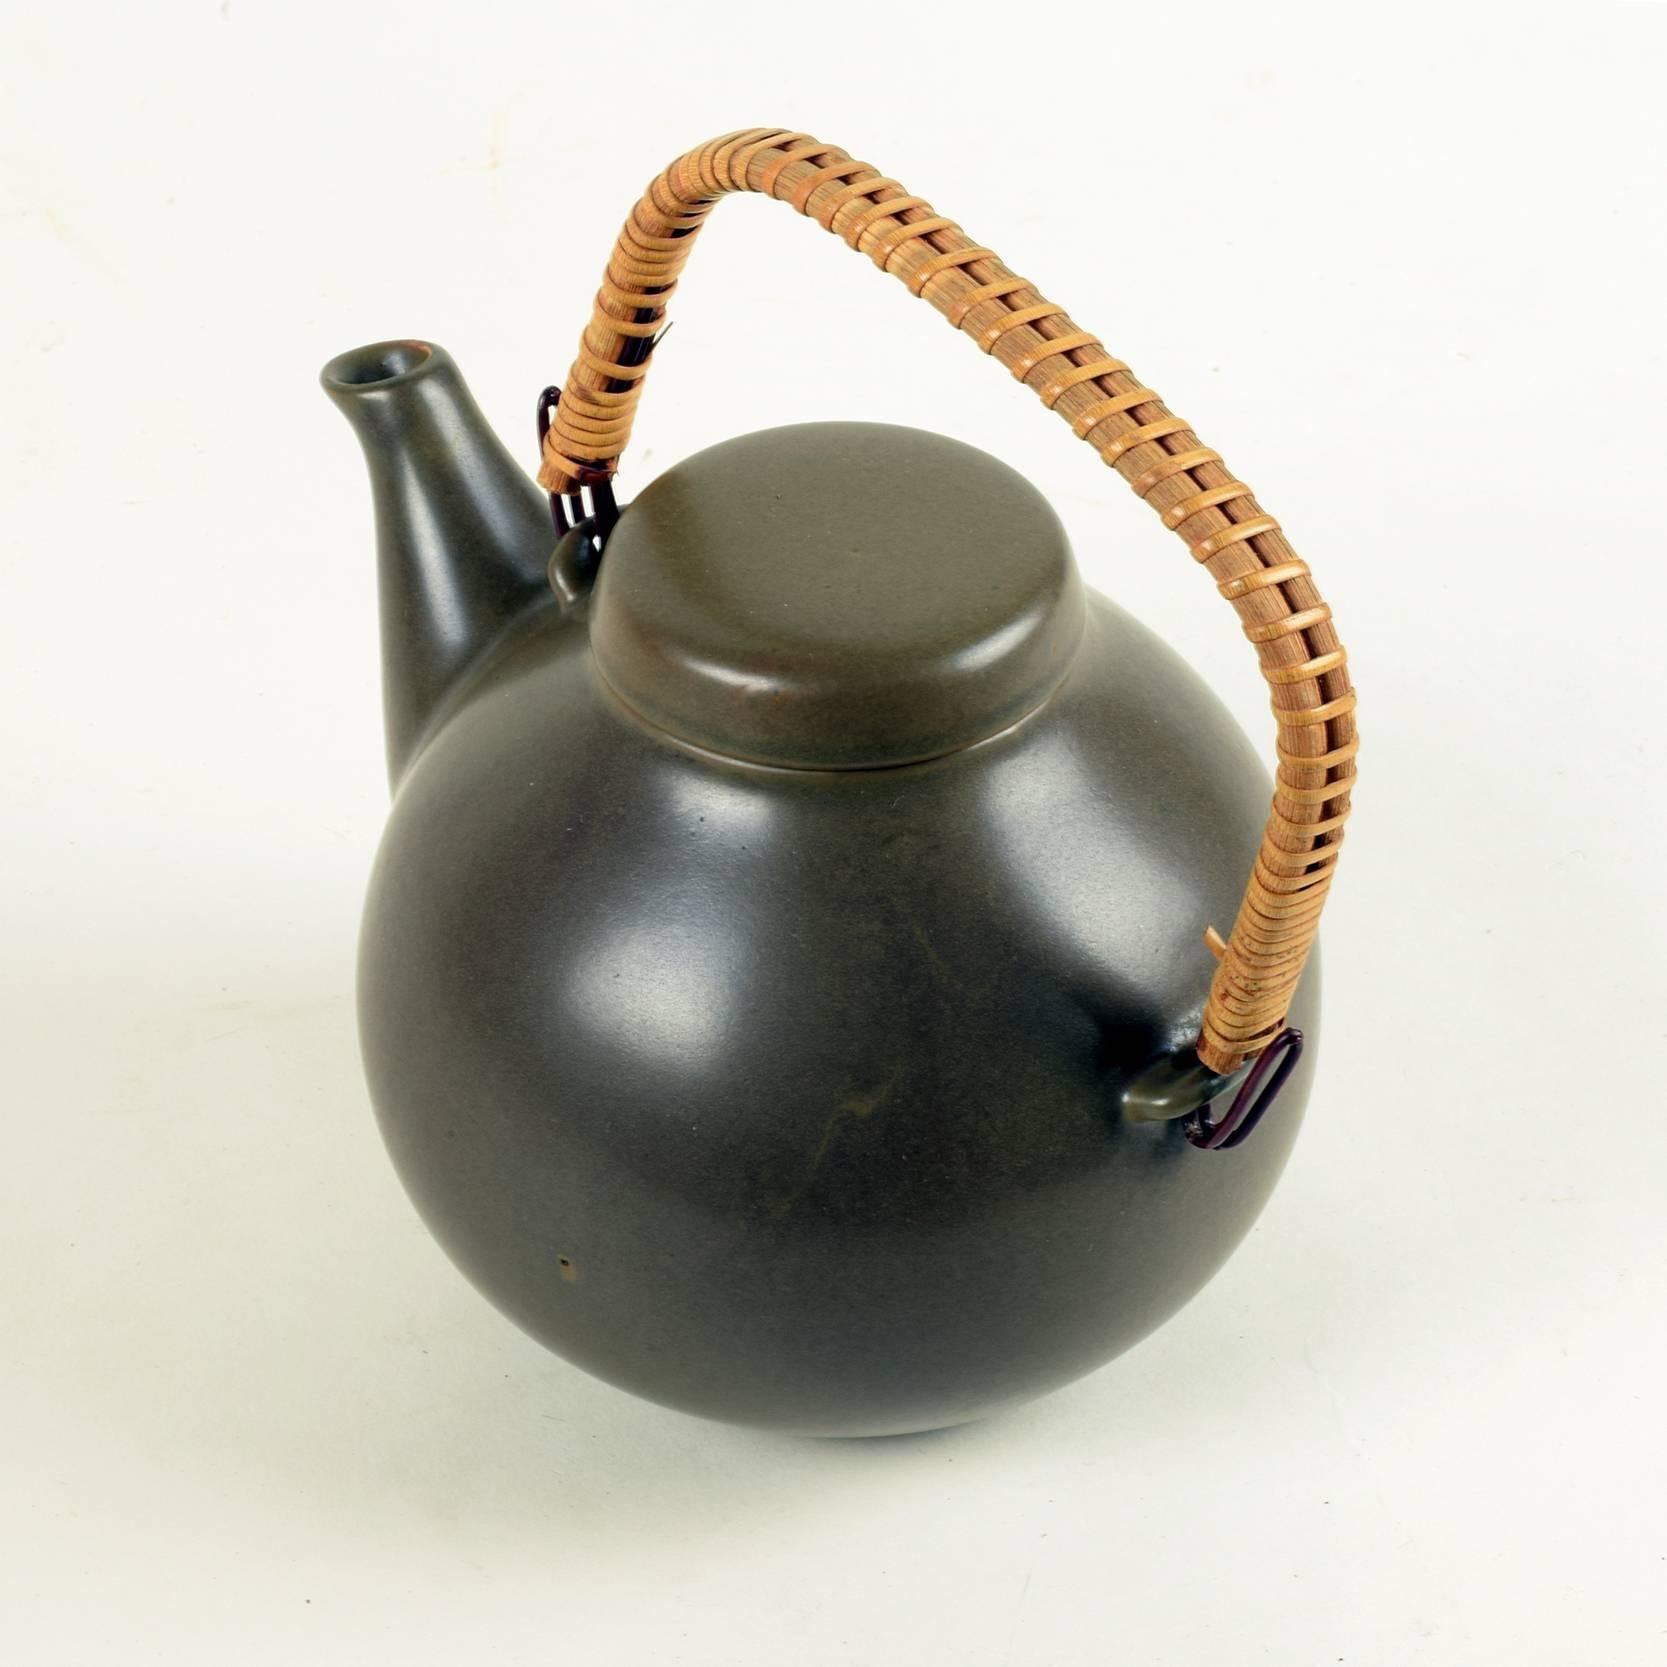 Ulla Procopé for Arabia Finland
Large GA3 teapot, designed 1953, manufactured from 1955-1972.
Fired and glazed earthenware, brown finish, rattan handle.
Good condition with minor signs of wear.

Dimensions excl. handle: Height 16cm (61/4 in),